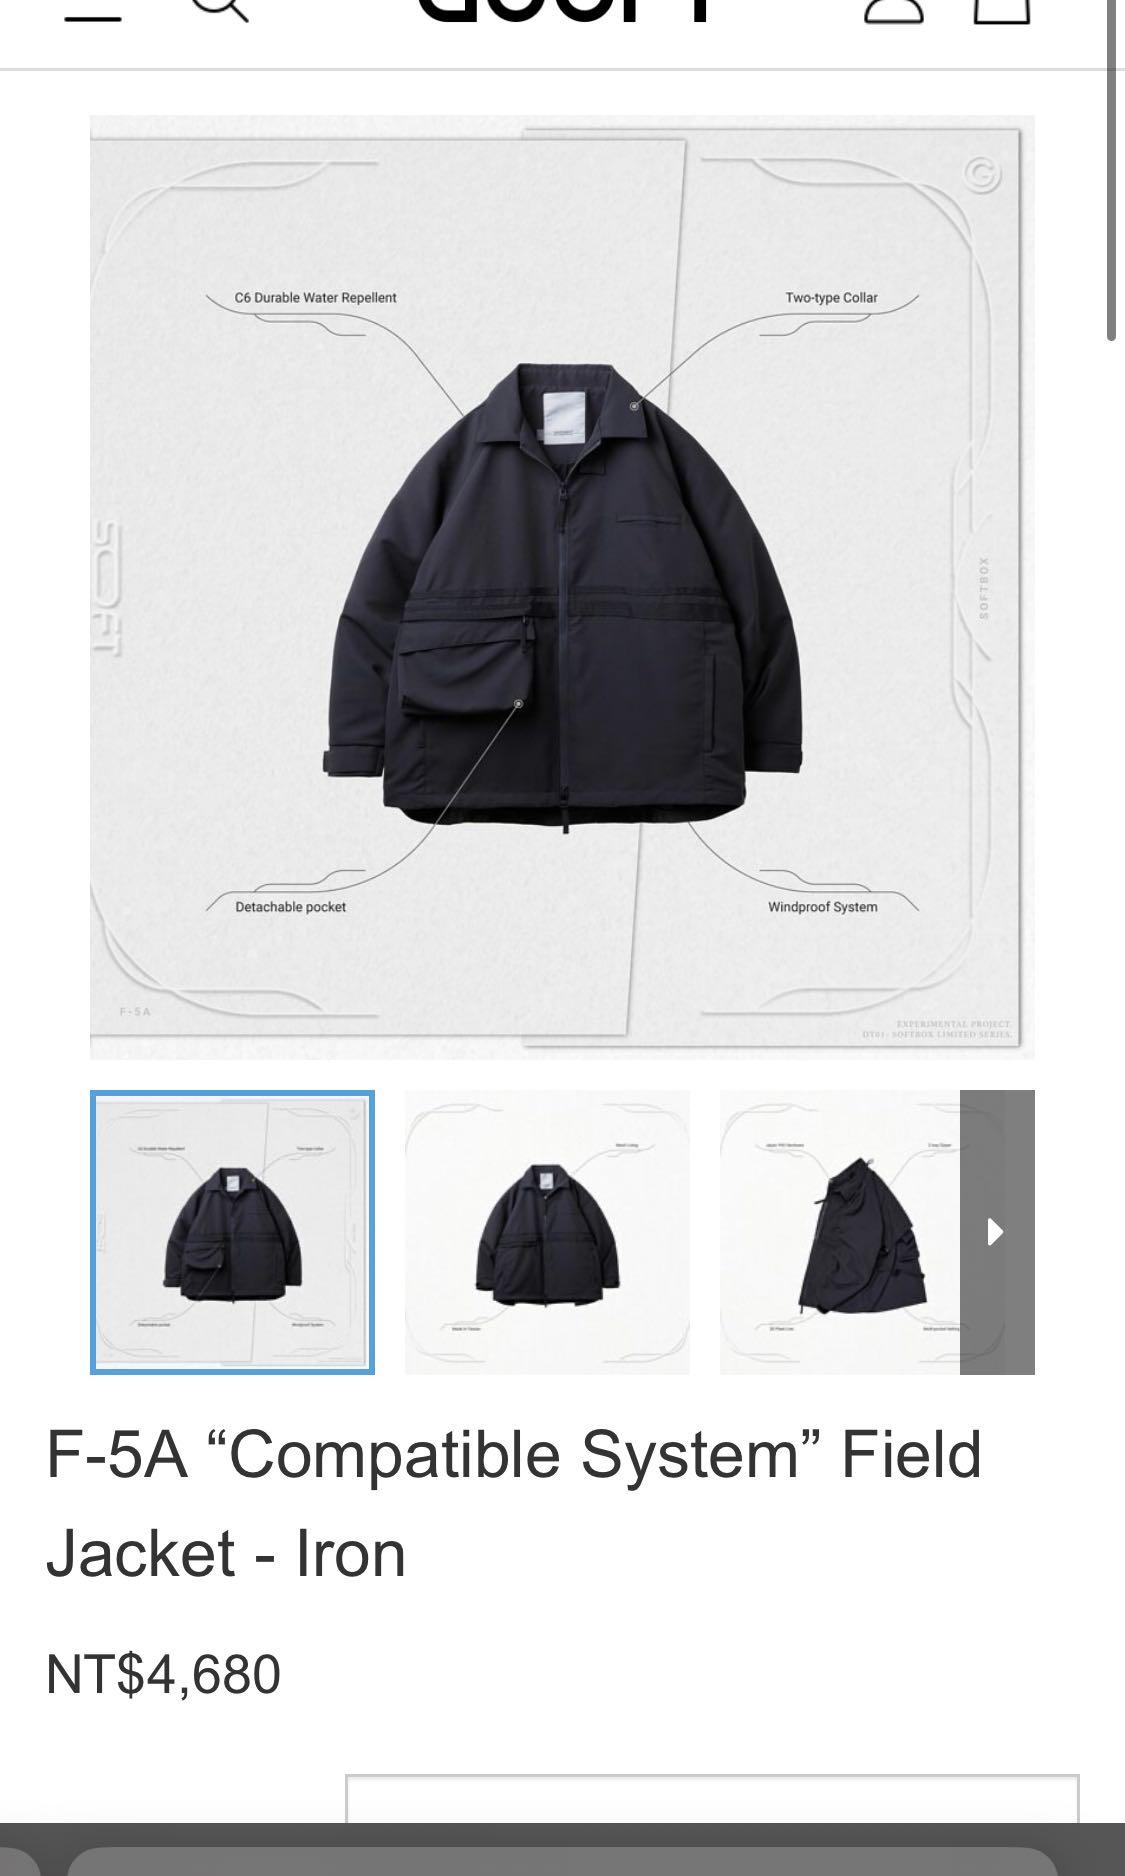 Goopi F-5A “Compatible System” Field Jacket - Iron 售出